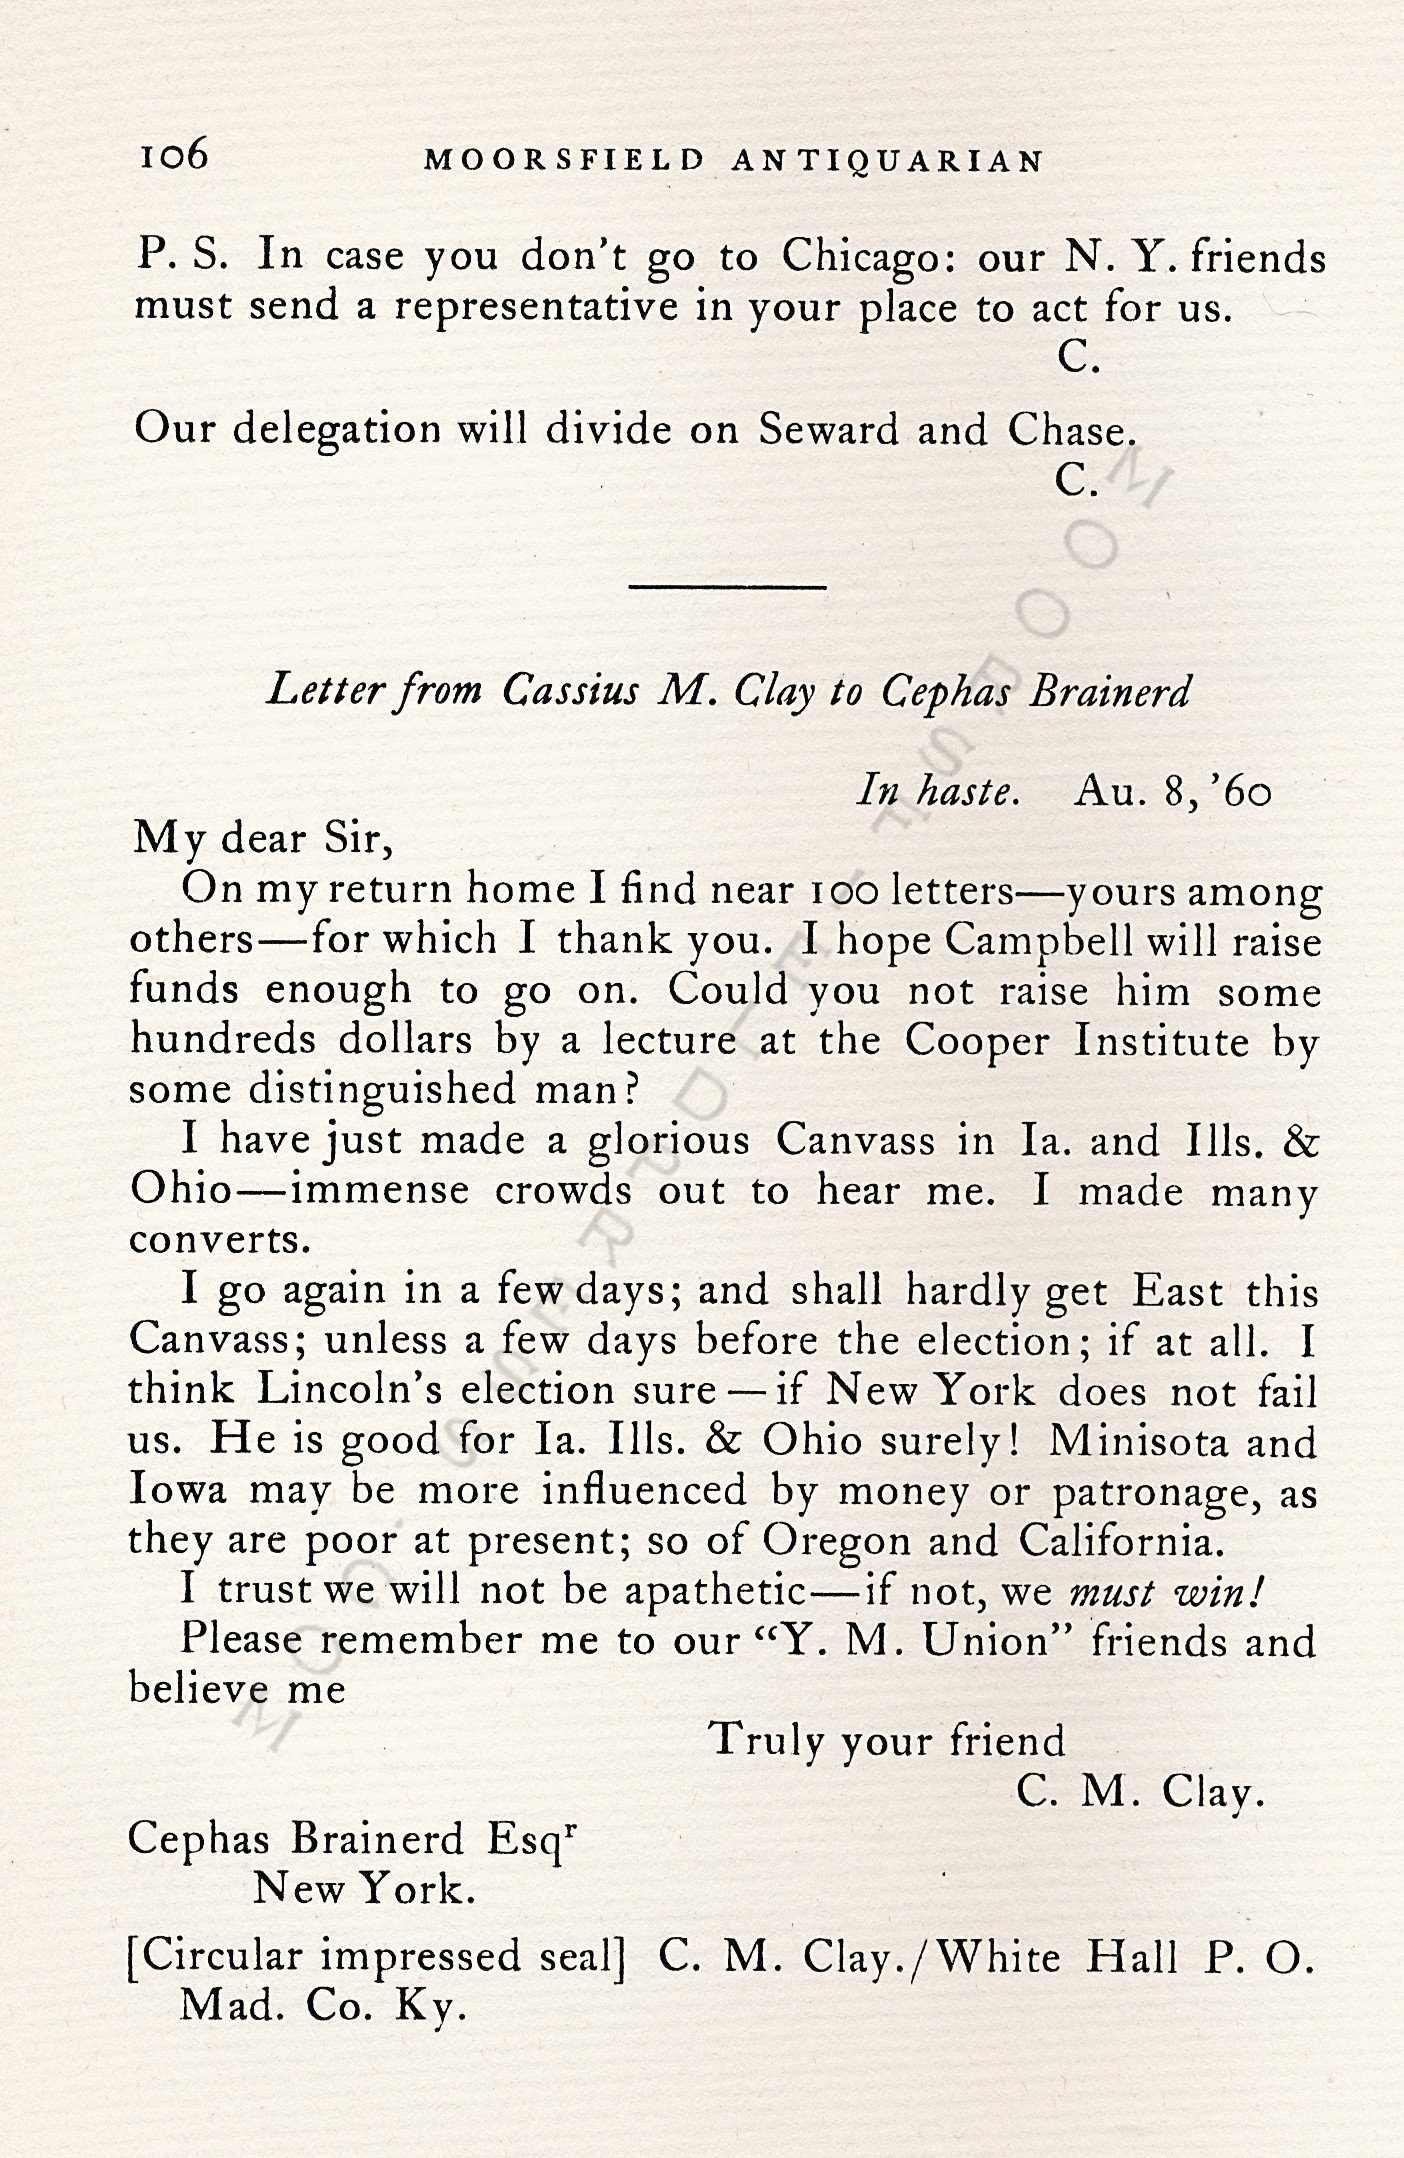 The 1860
                      Presidential Campaign-Letters of Cassius M. Clay
                      to Cephas Brainerd